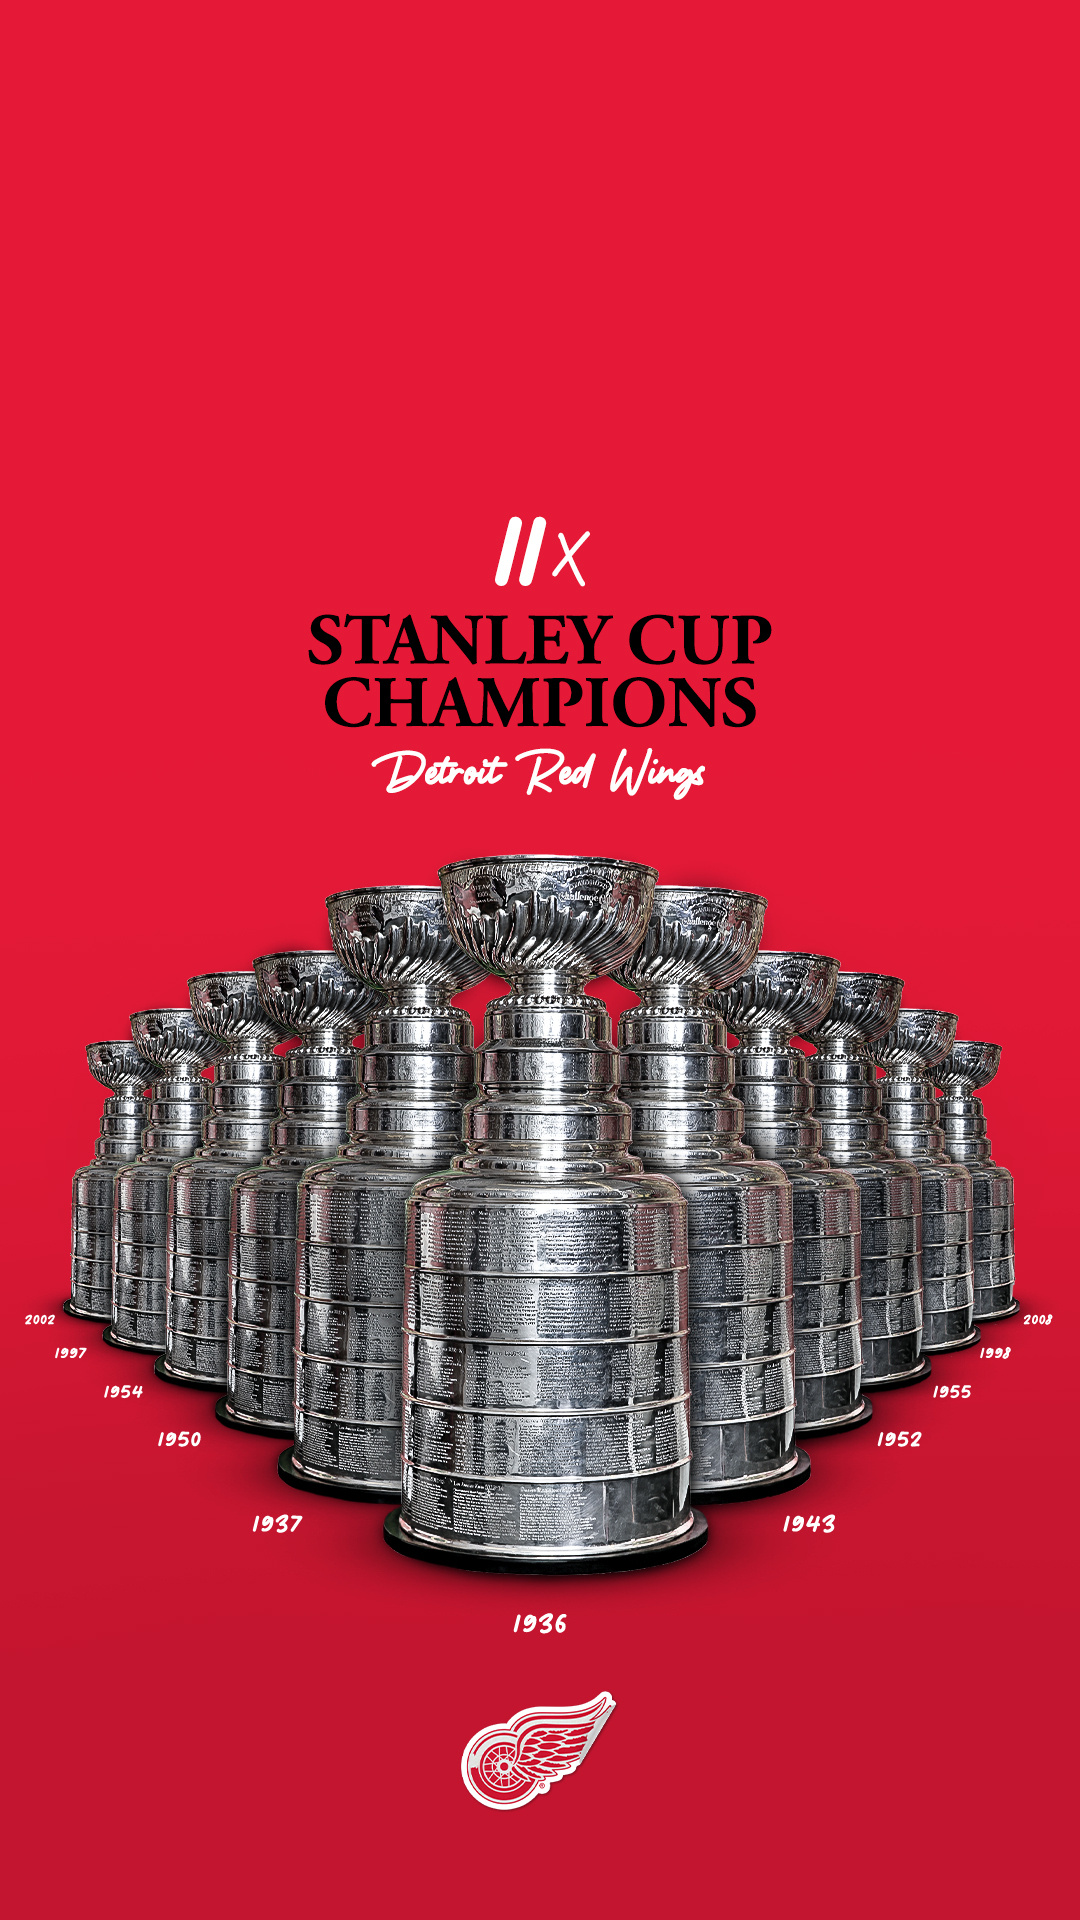 Detroit Red Wings: The team defeated the Montreal Canadiens in the 1954 Stanley Cup Finals. 1080x1920 Full HD Wallpaper.